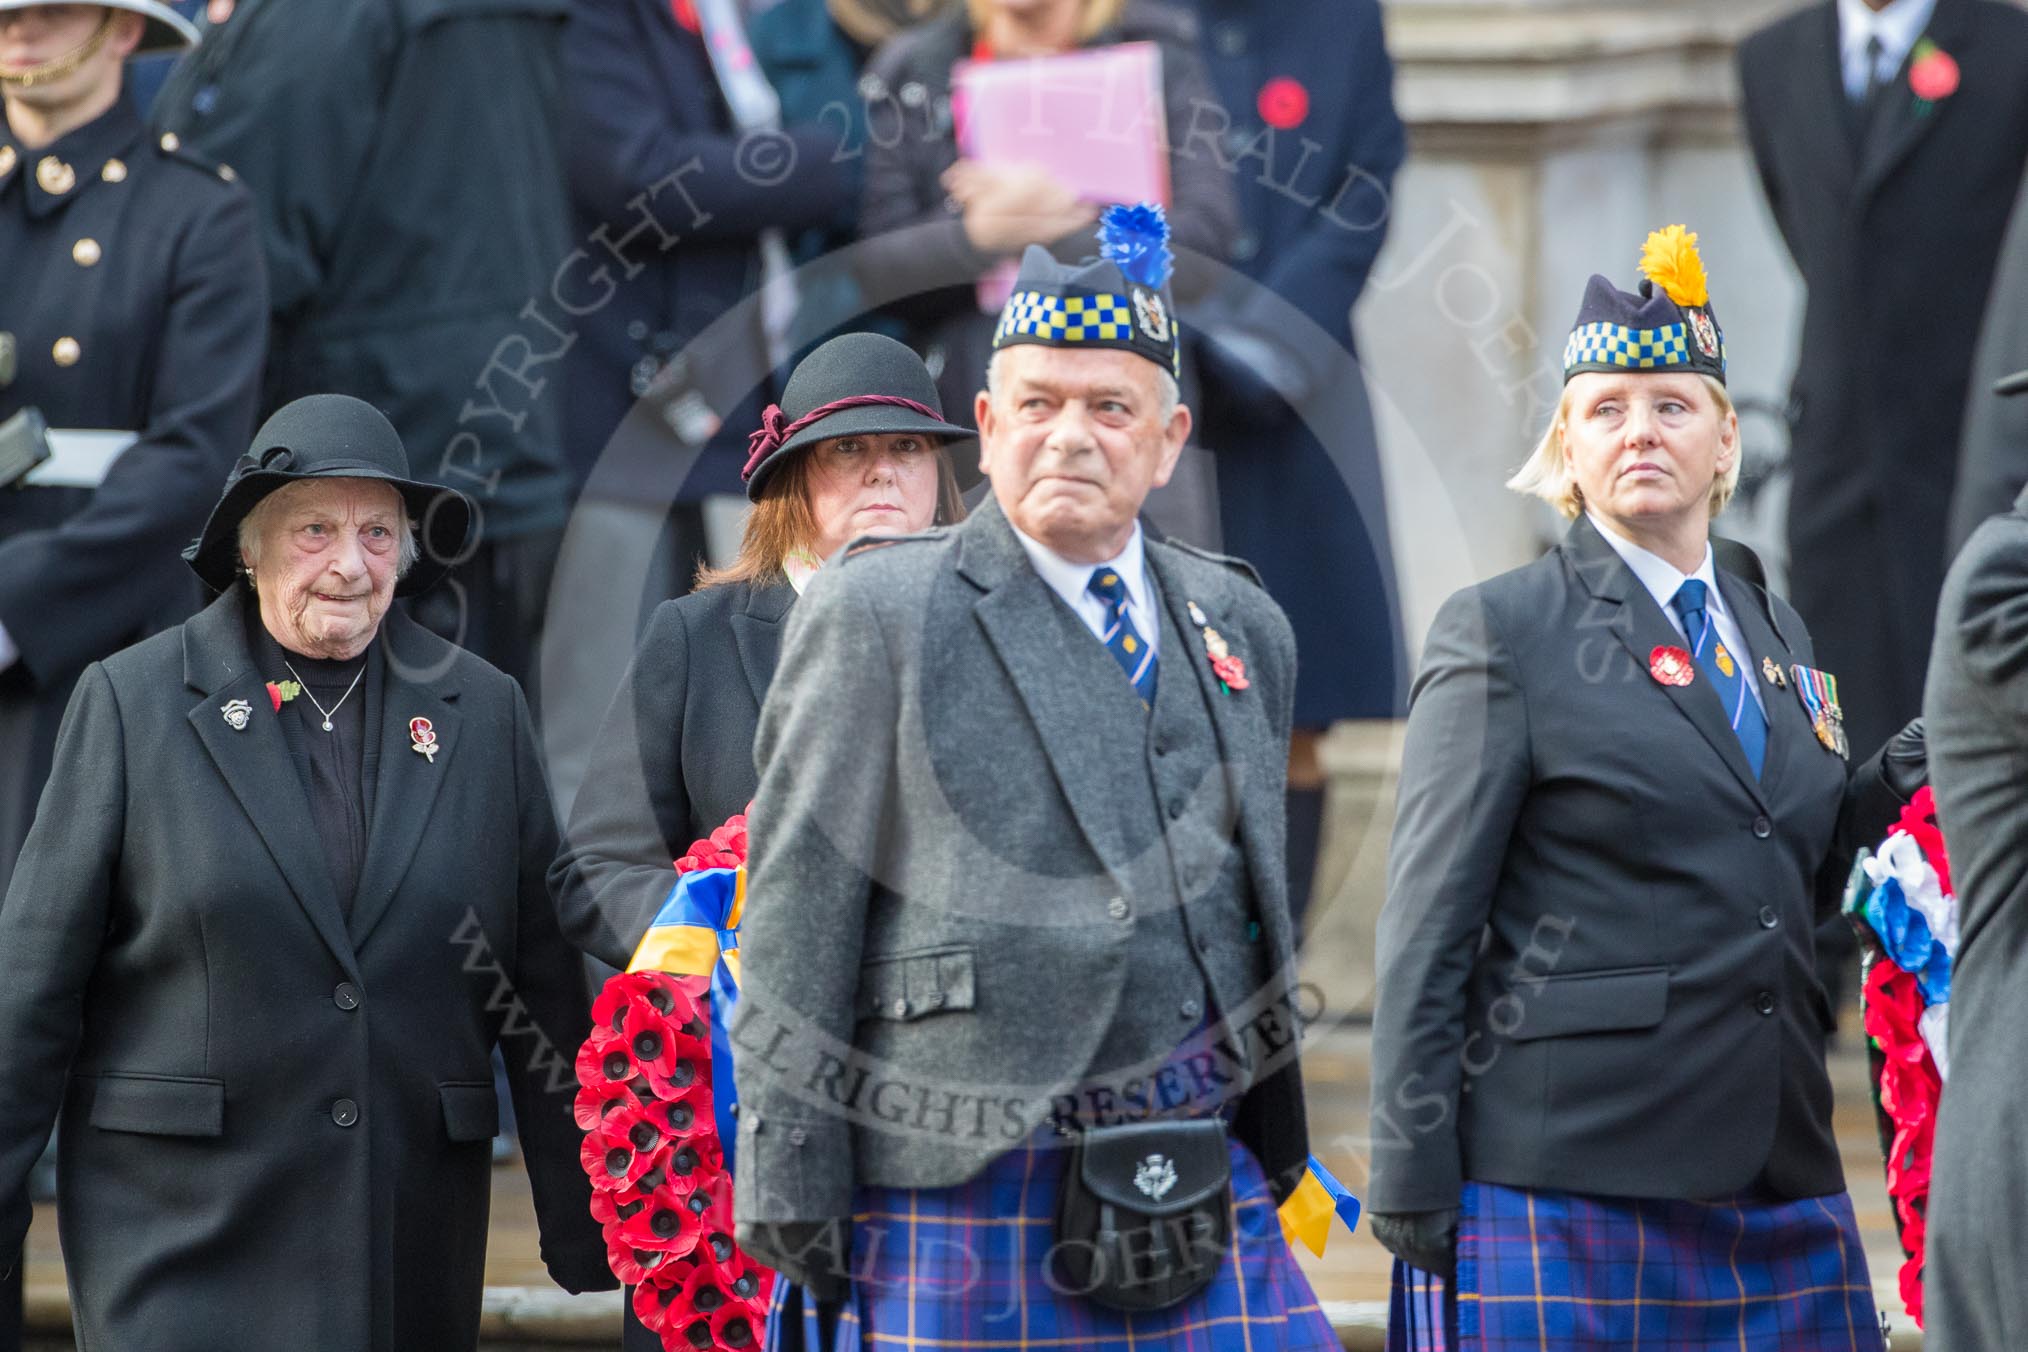 Representatives of The Royal British Legion, London Transport, the Royal Air Forces Association , the Royal Naval Association , the Royal Commonwealth Ex­Services League, the Royal British Legion Scotland, and the Royal British Legion Women’s Section leaving the Foreign and Commonwealth Office before the Remembrance Sunday Cenotaph Ceremony 2018 at Horse Guards Parade, Westminster, London, 11 November 2018, 10:35.